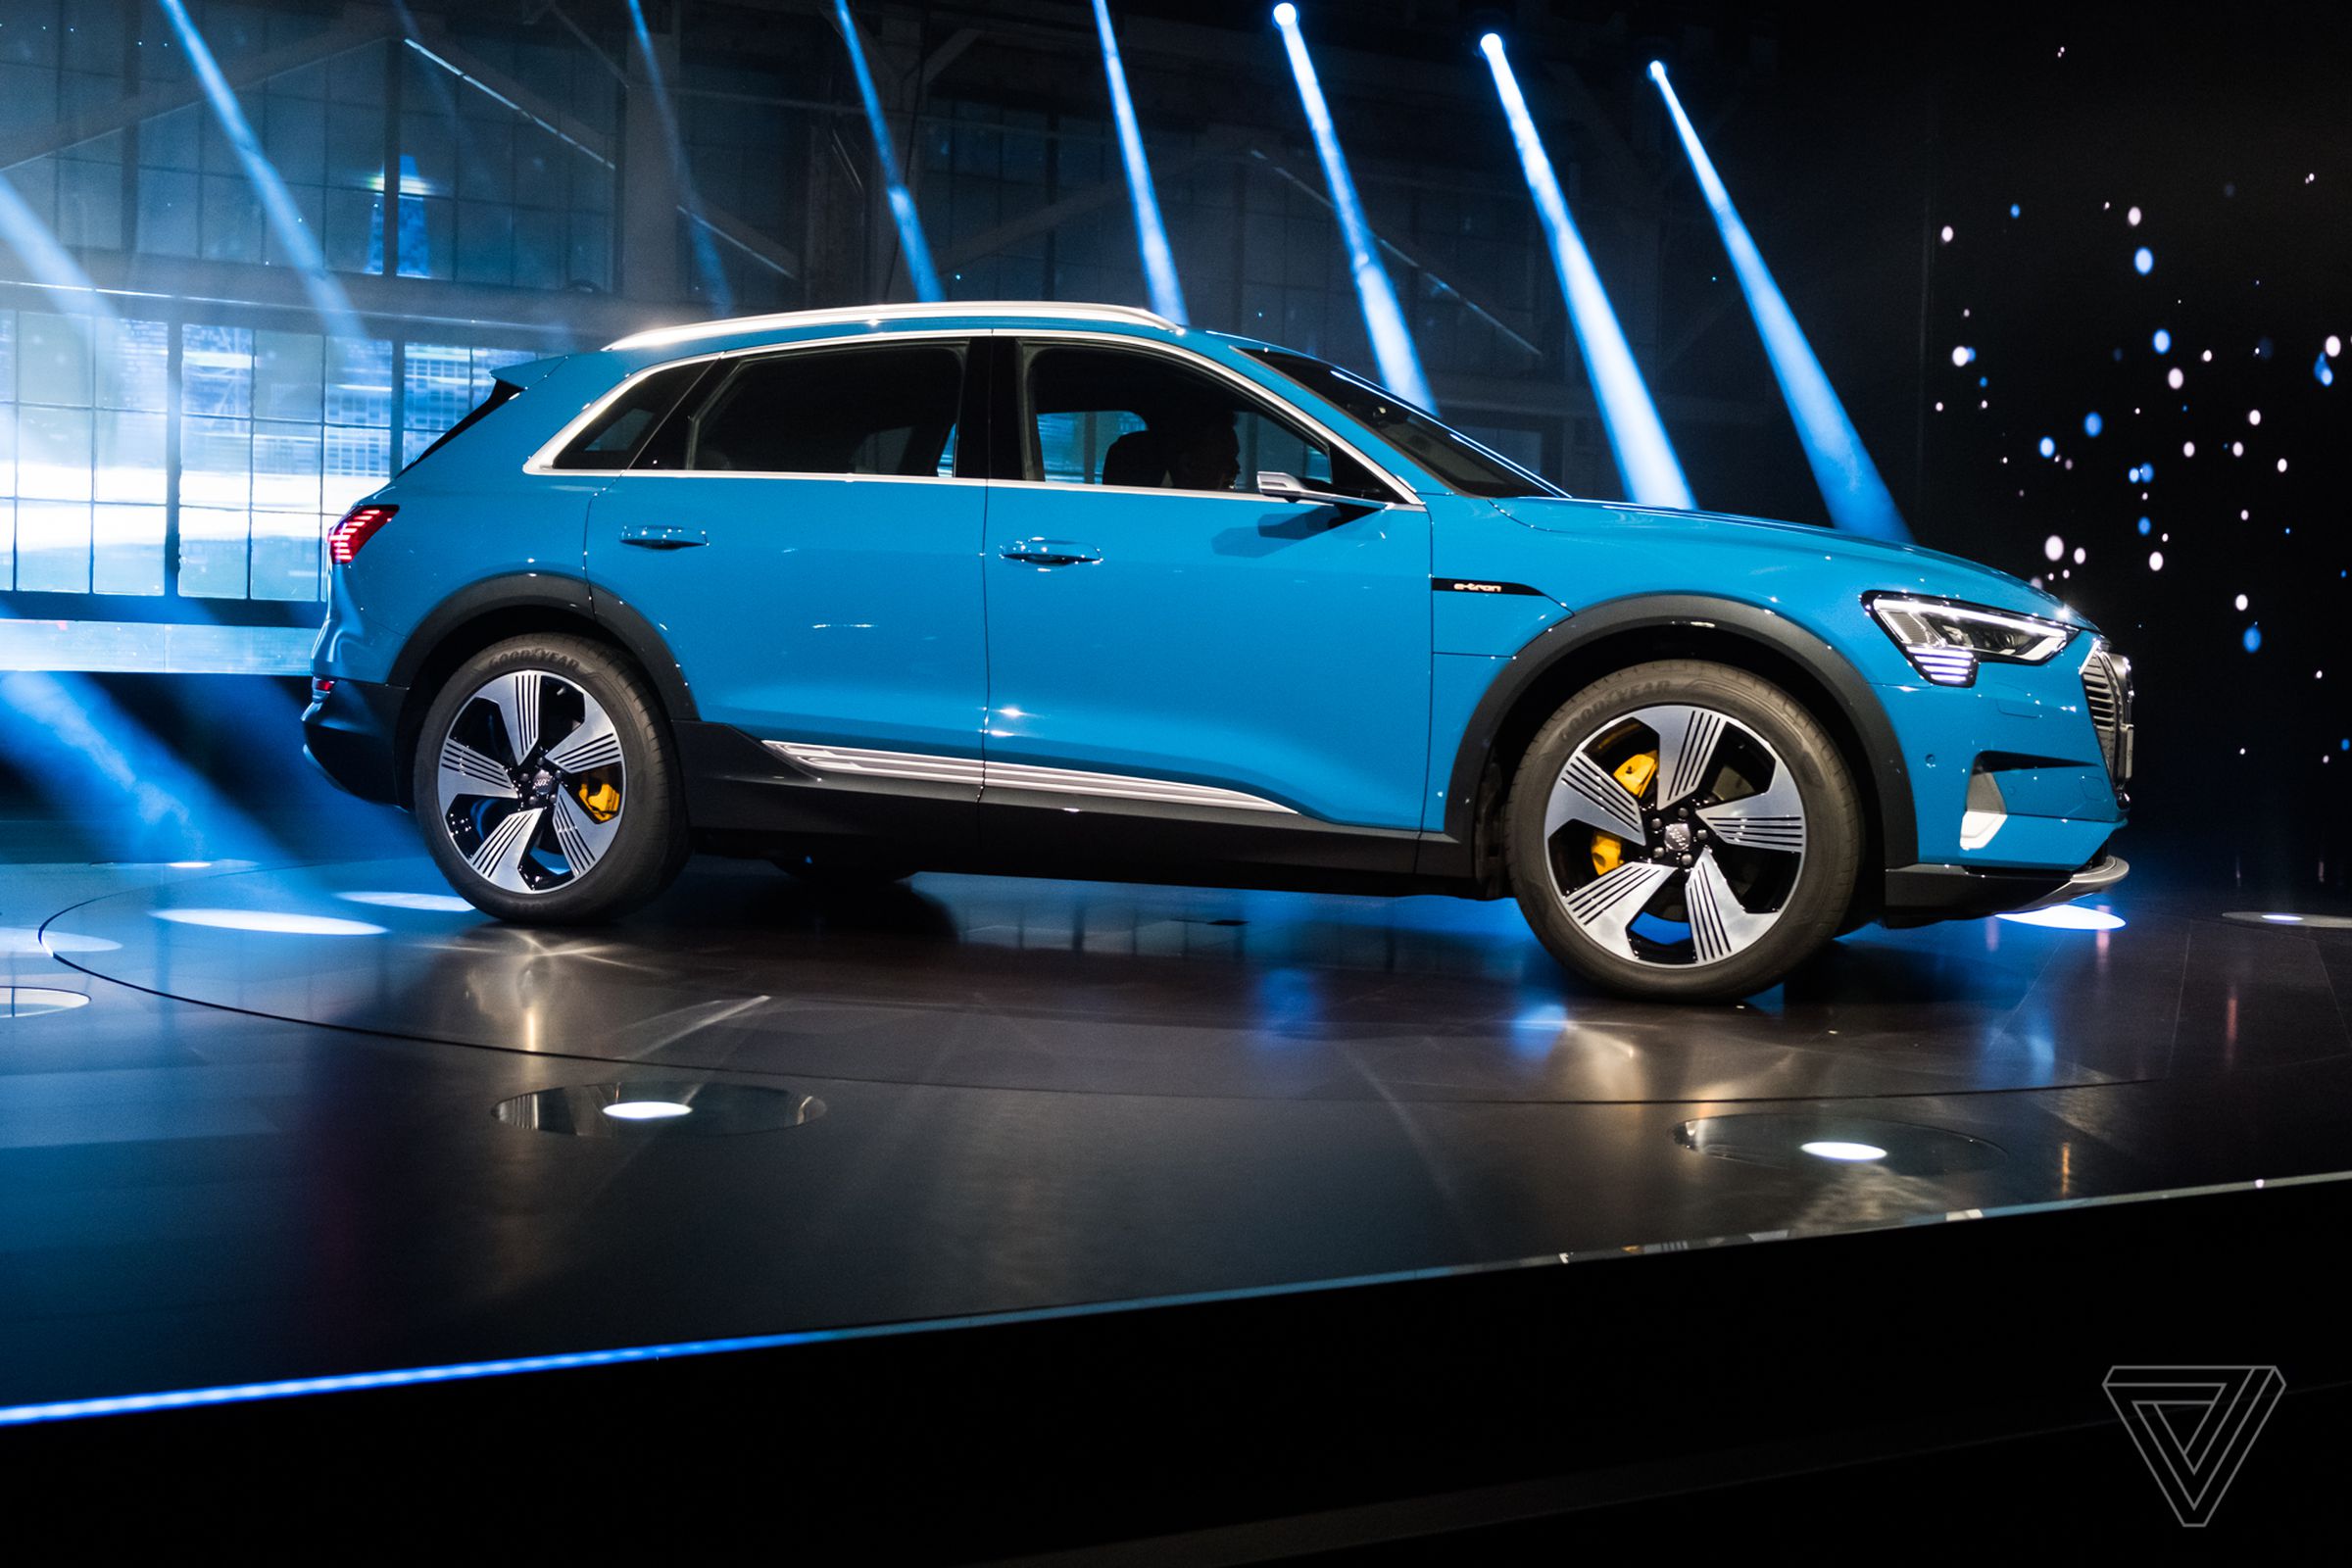 The Audi E-Tron at its unveiling in San Francisco last September.